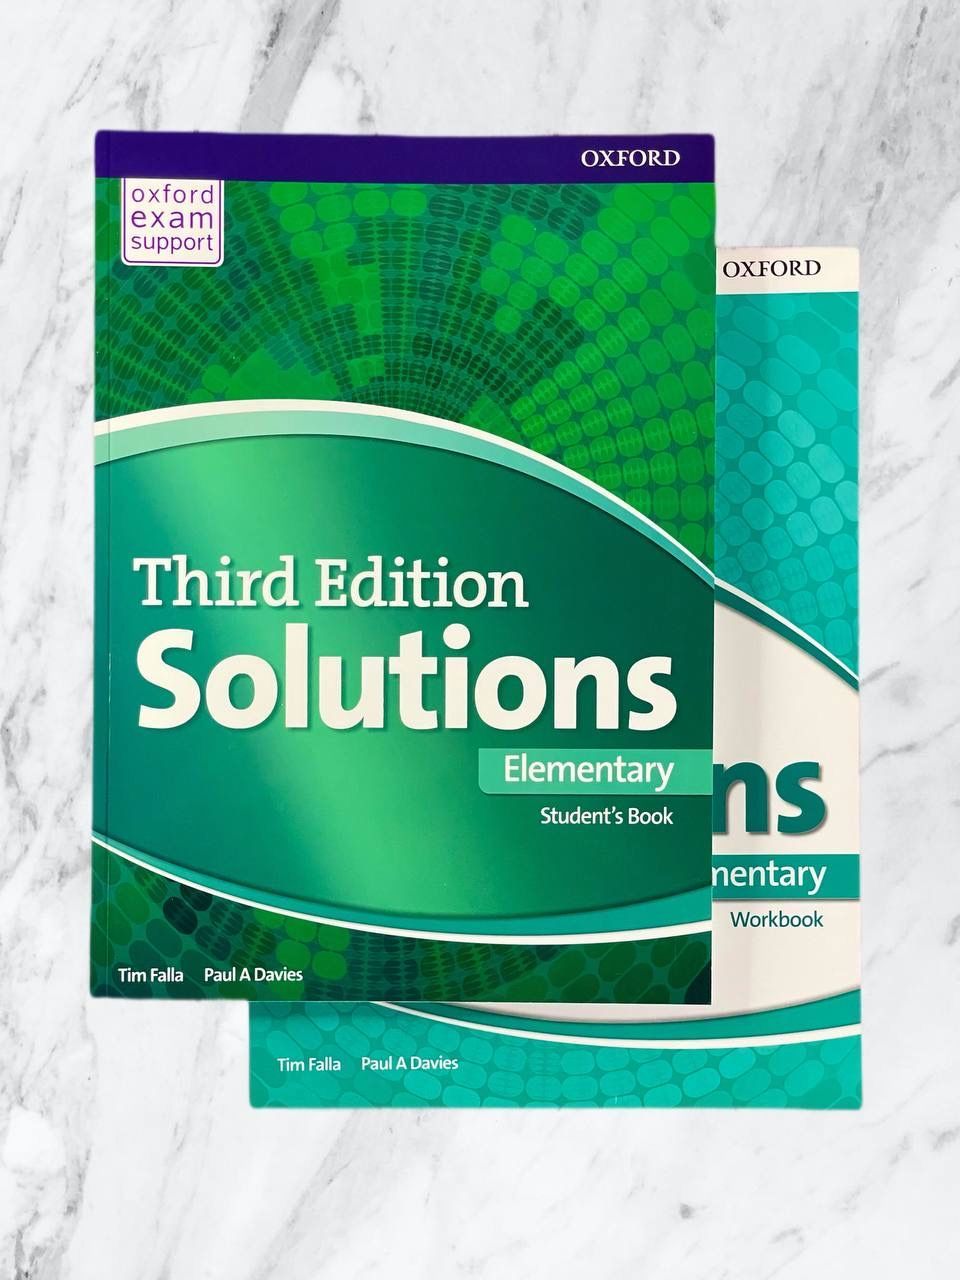 Solutions pre intermediate 3rd edition students book. Solutions Elementary 3rd Edition. Solutions Elementary student's book. Third Edition solutions Elementary Workbook. Solutions Elementary 3rd Edition student's book.